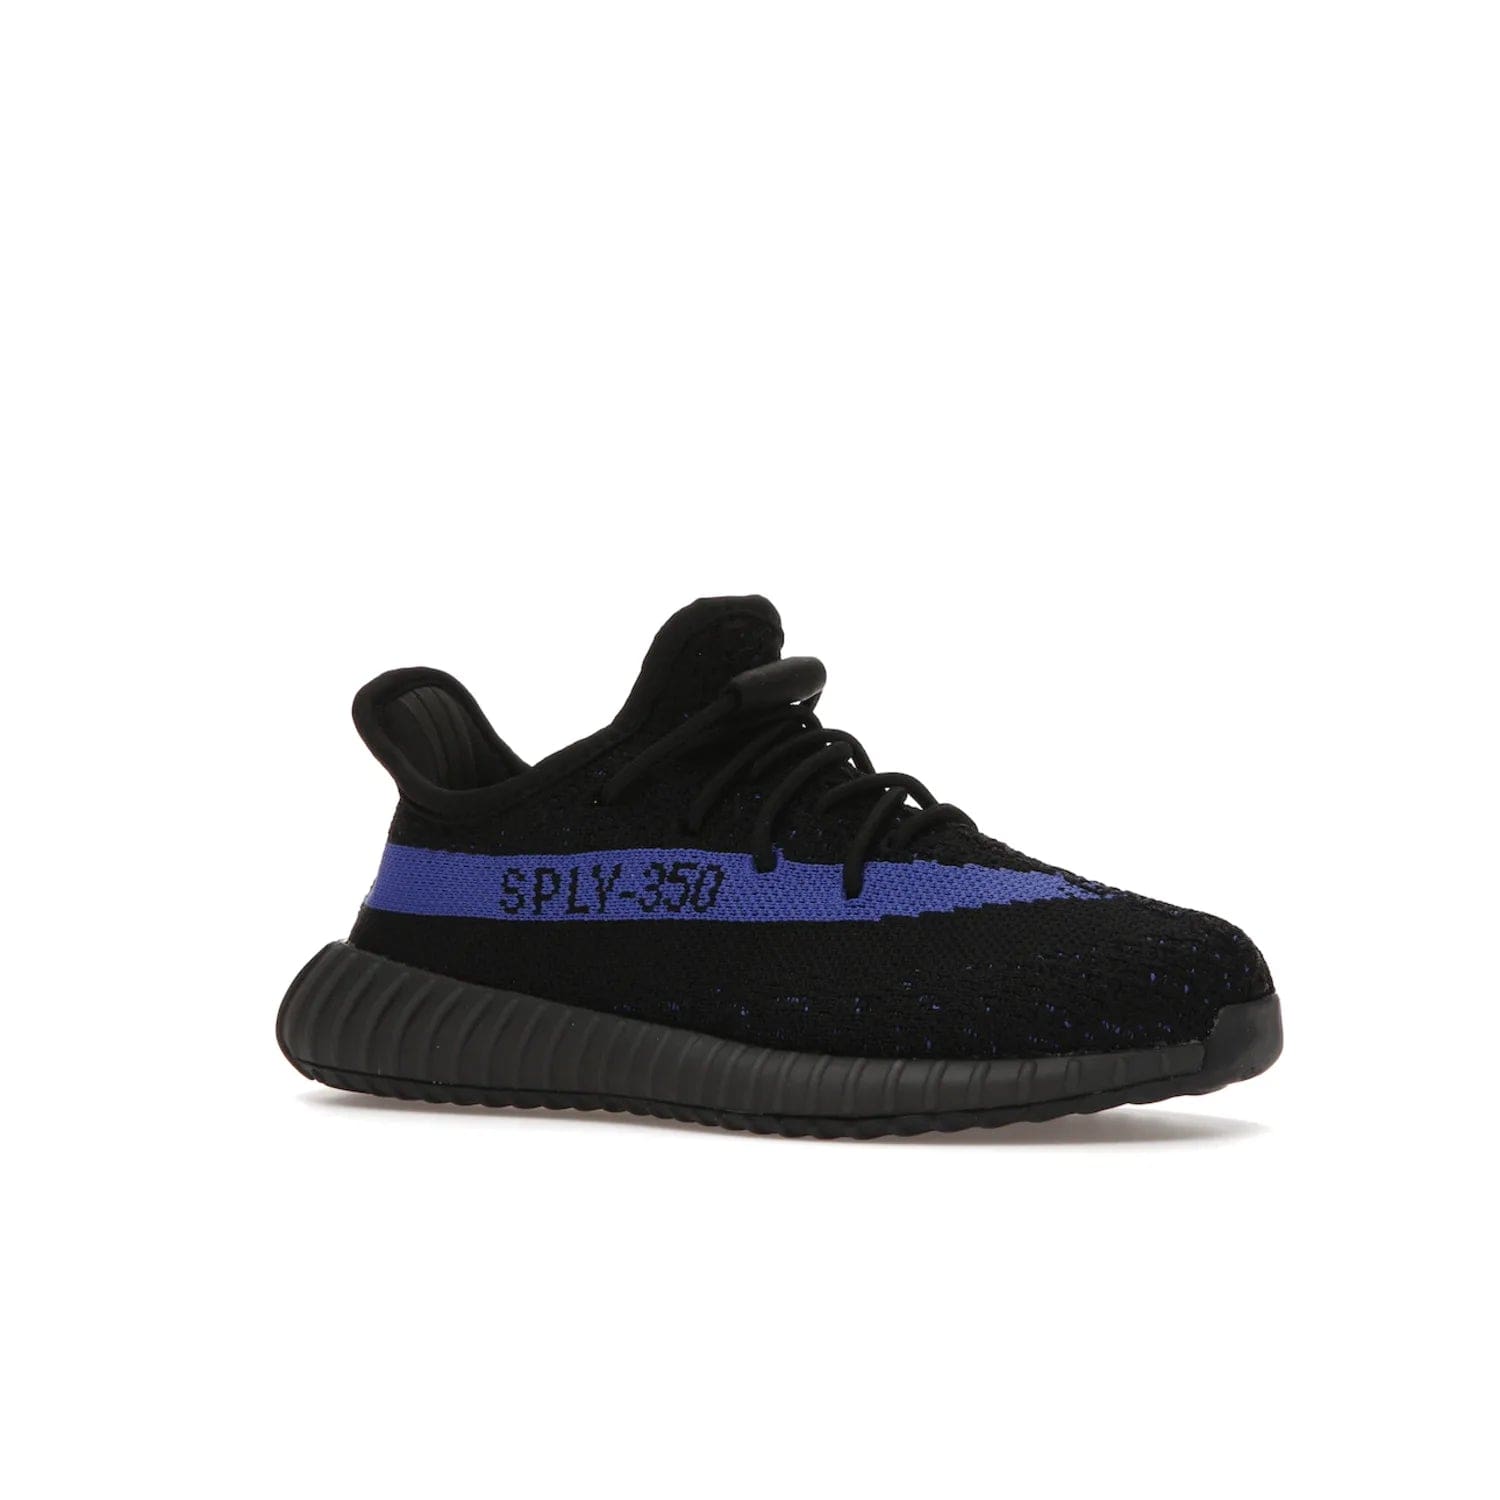 adidas Yeezy Boost 350 V2 Dazzling Blue (Kids) - Image 4 - Only at www.BallersClubKickz.com - Shop the adidas Yeezy Boost 350 V2 Dazzling Blue (Kids). Features a black Primeknit upper with a royal blue 'SPLY-350' streak and a full-length Boost midsole. Durable rubber outsole provides plenty of traction. Available for $160.